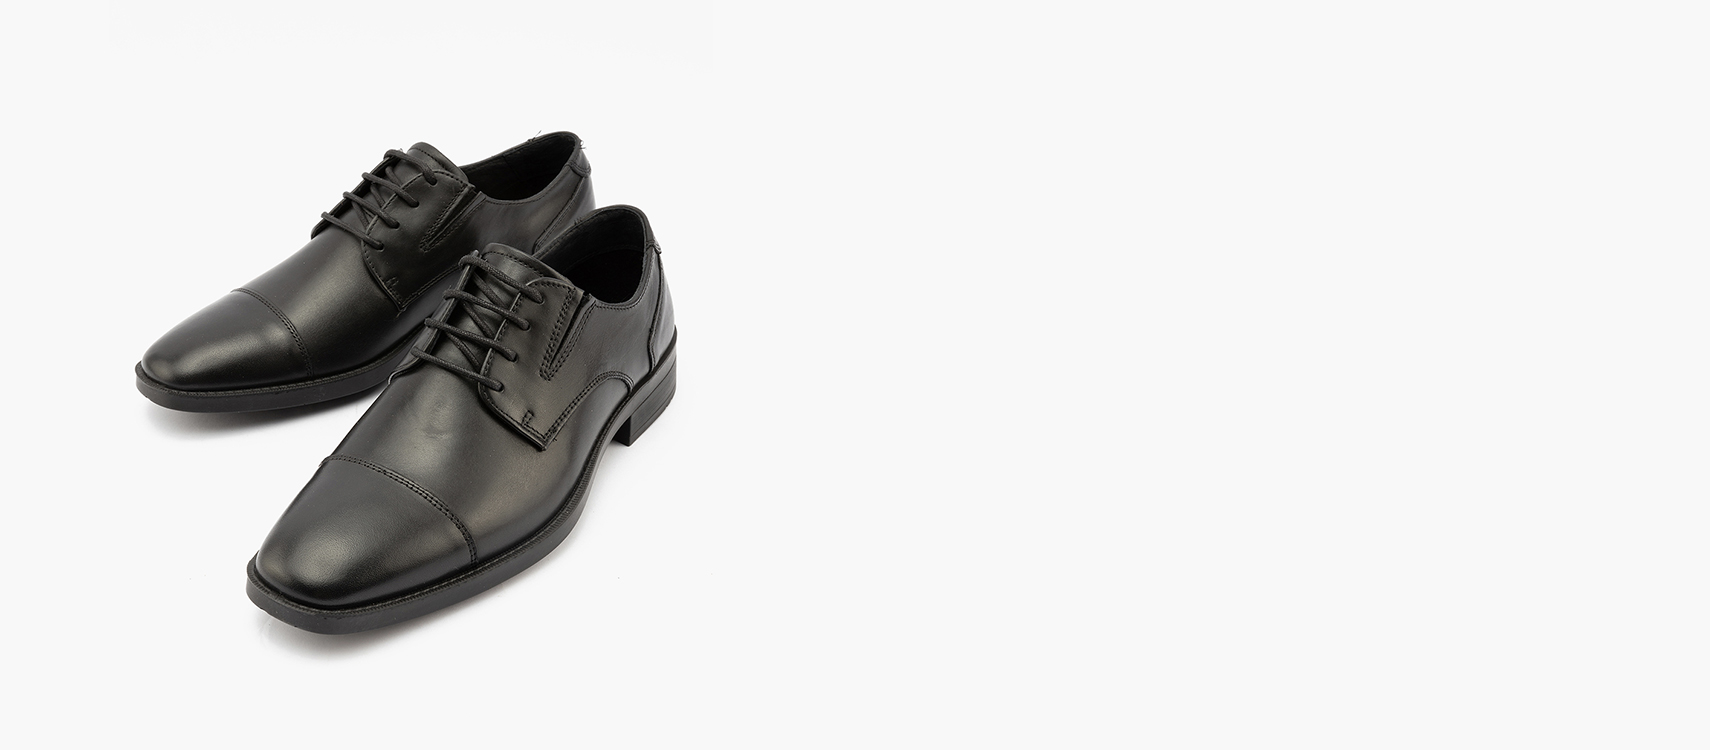 Corporate Shoes For Men